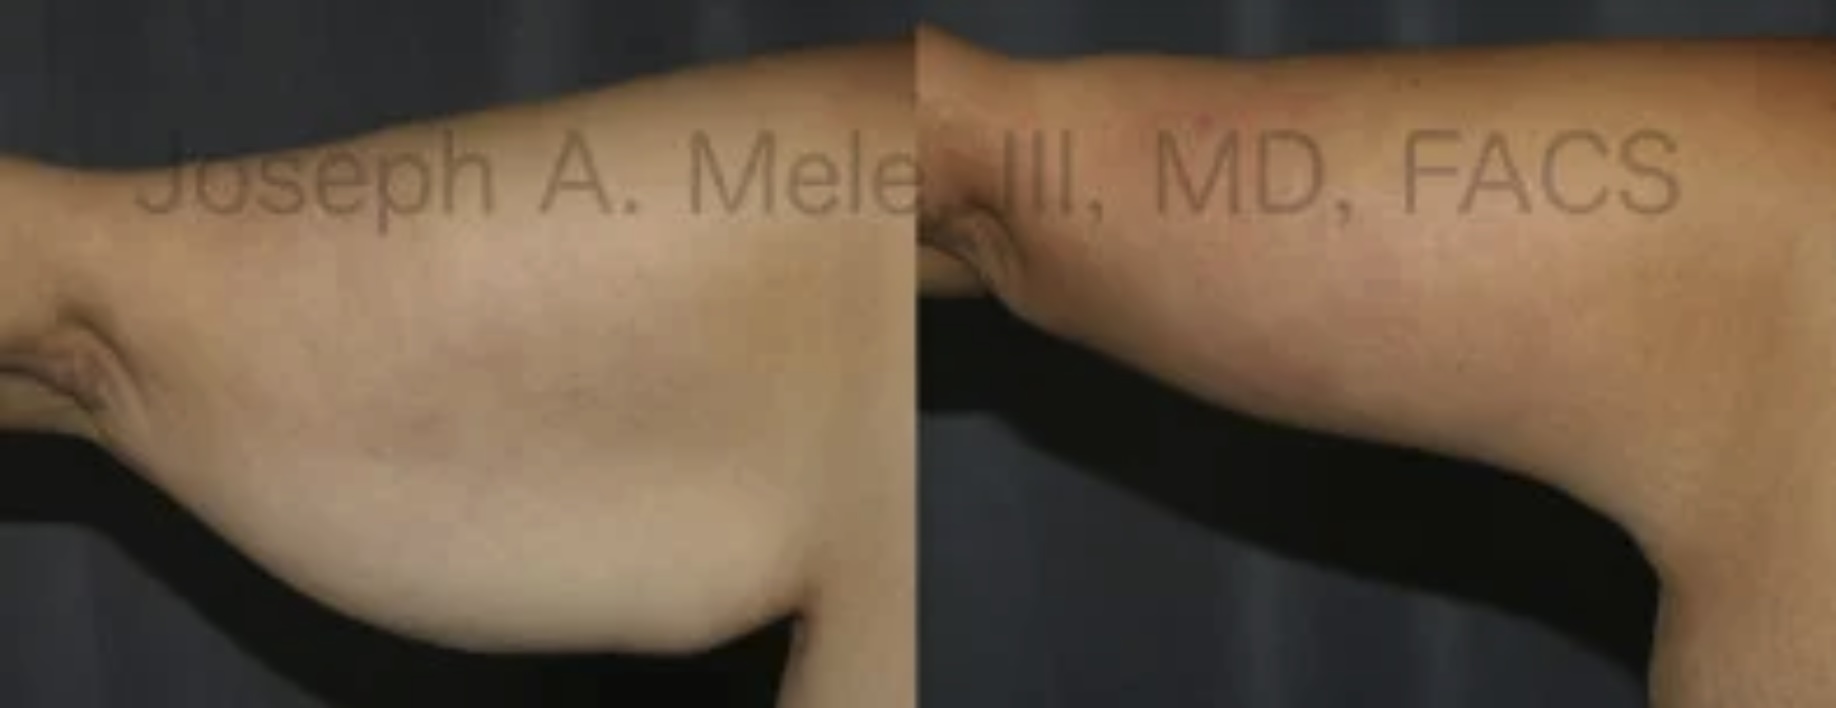 Arm Lift Before and After Pictures (Brachioplasty)